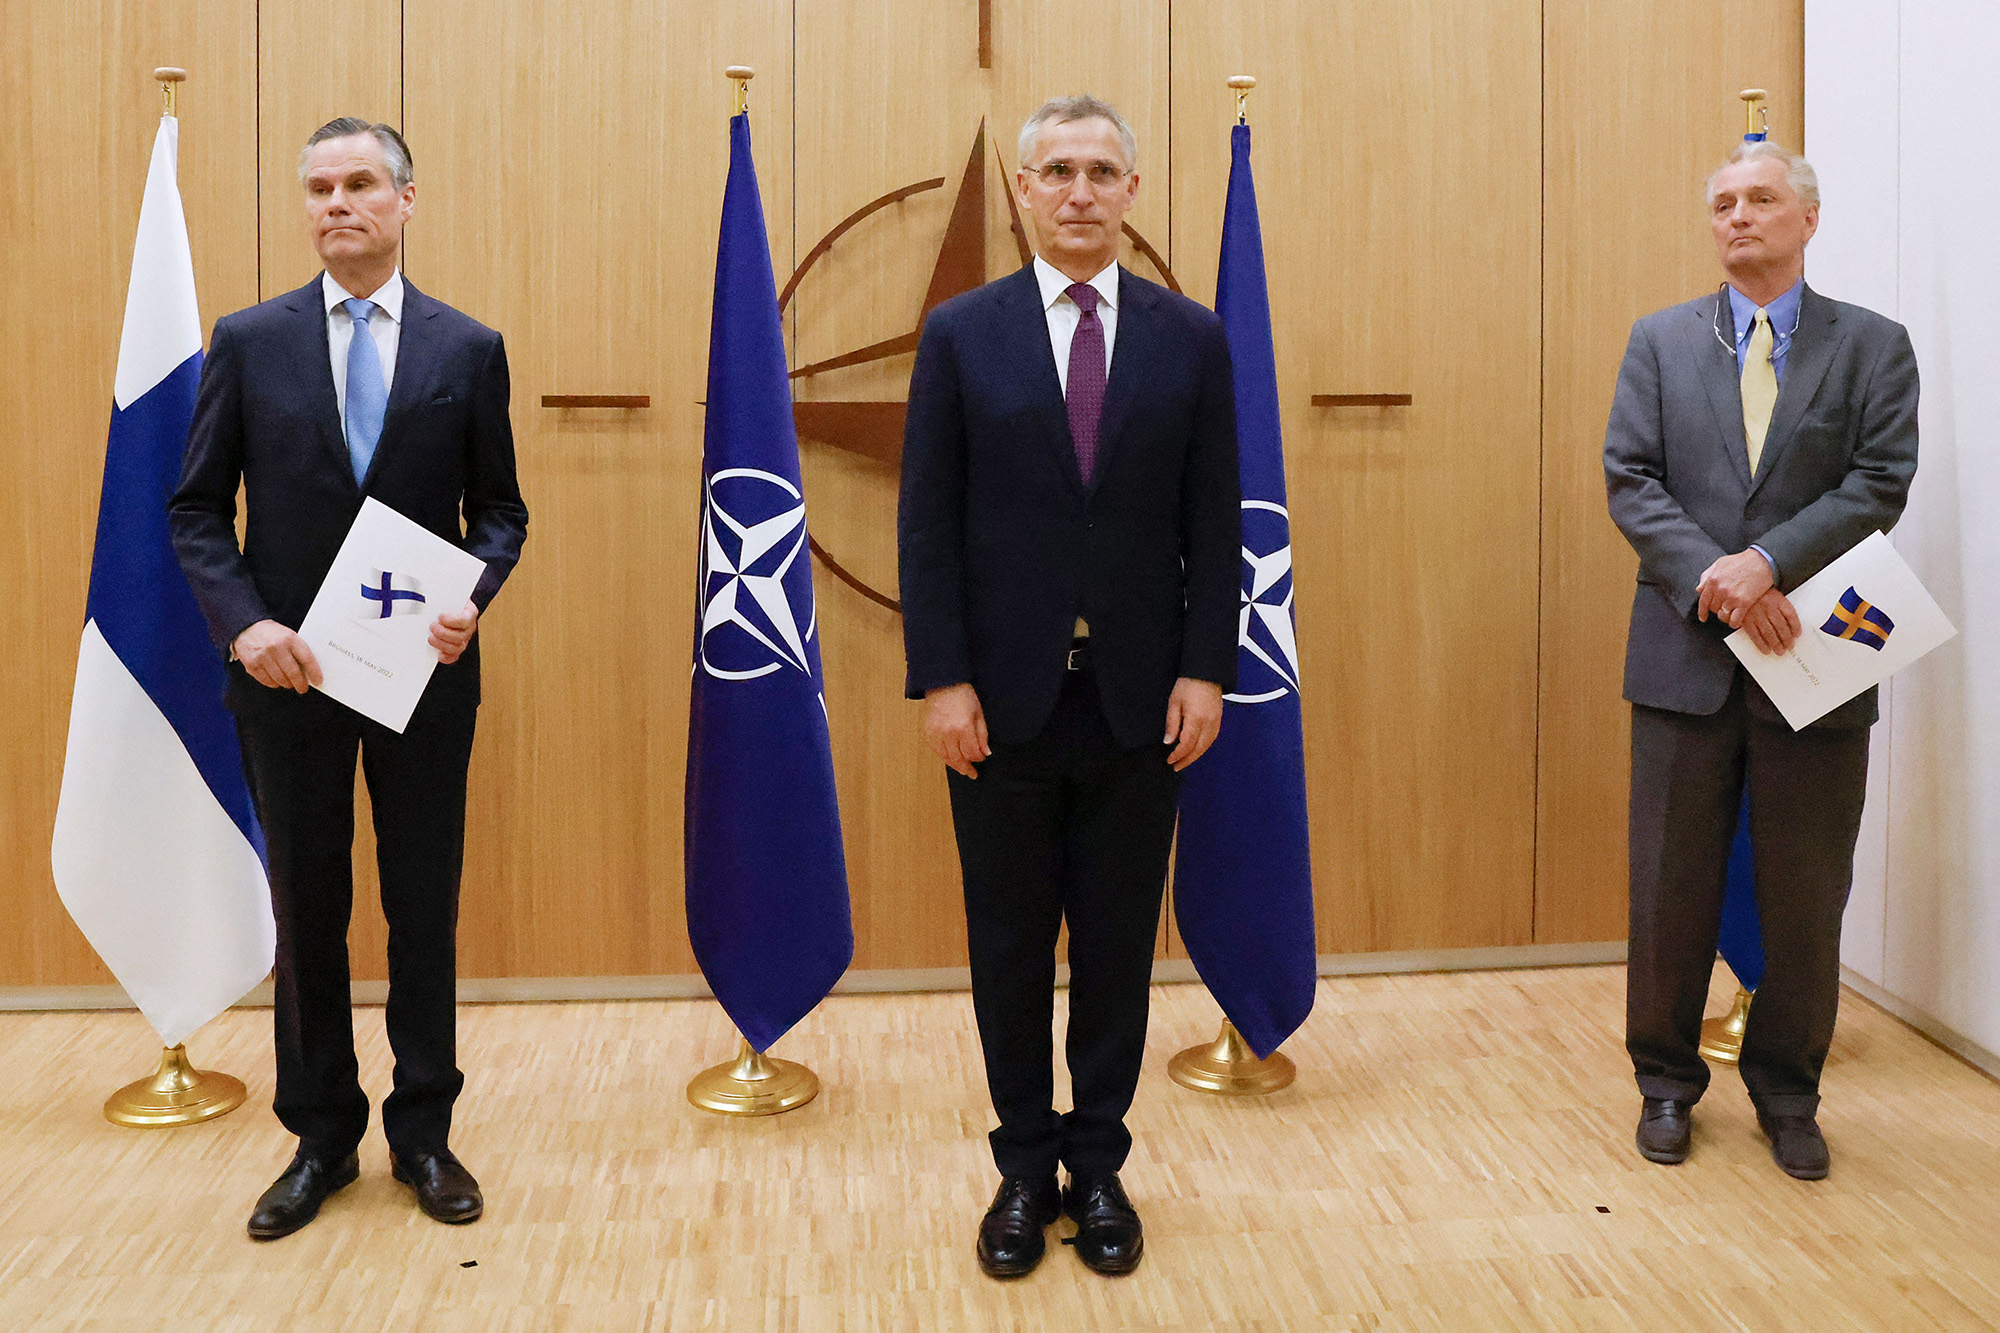 inland's Ambassador to NATO Klaus Korhonen, NATO Secretary-General Jens Stoltenberg and Sweden's Ambassador to NATO Axel Wernhoff pose during a ceremony to mark Sweden's and Finland's application for membership in Brussels, Belgium, on May 18.